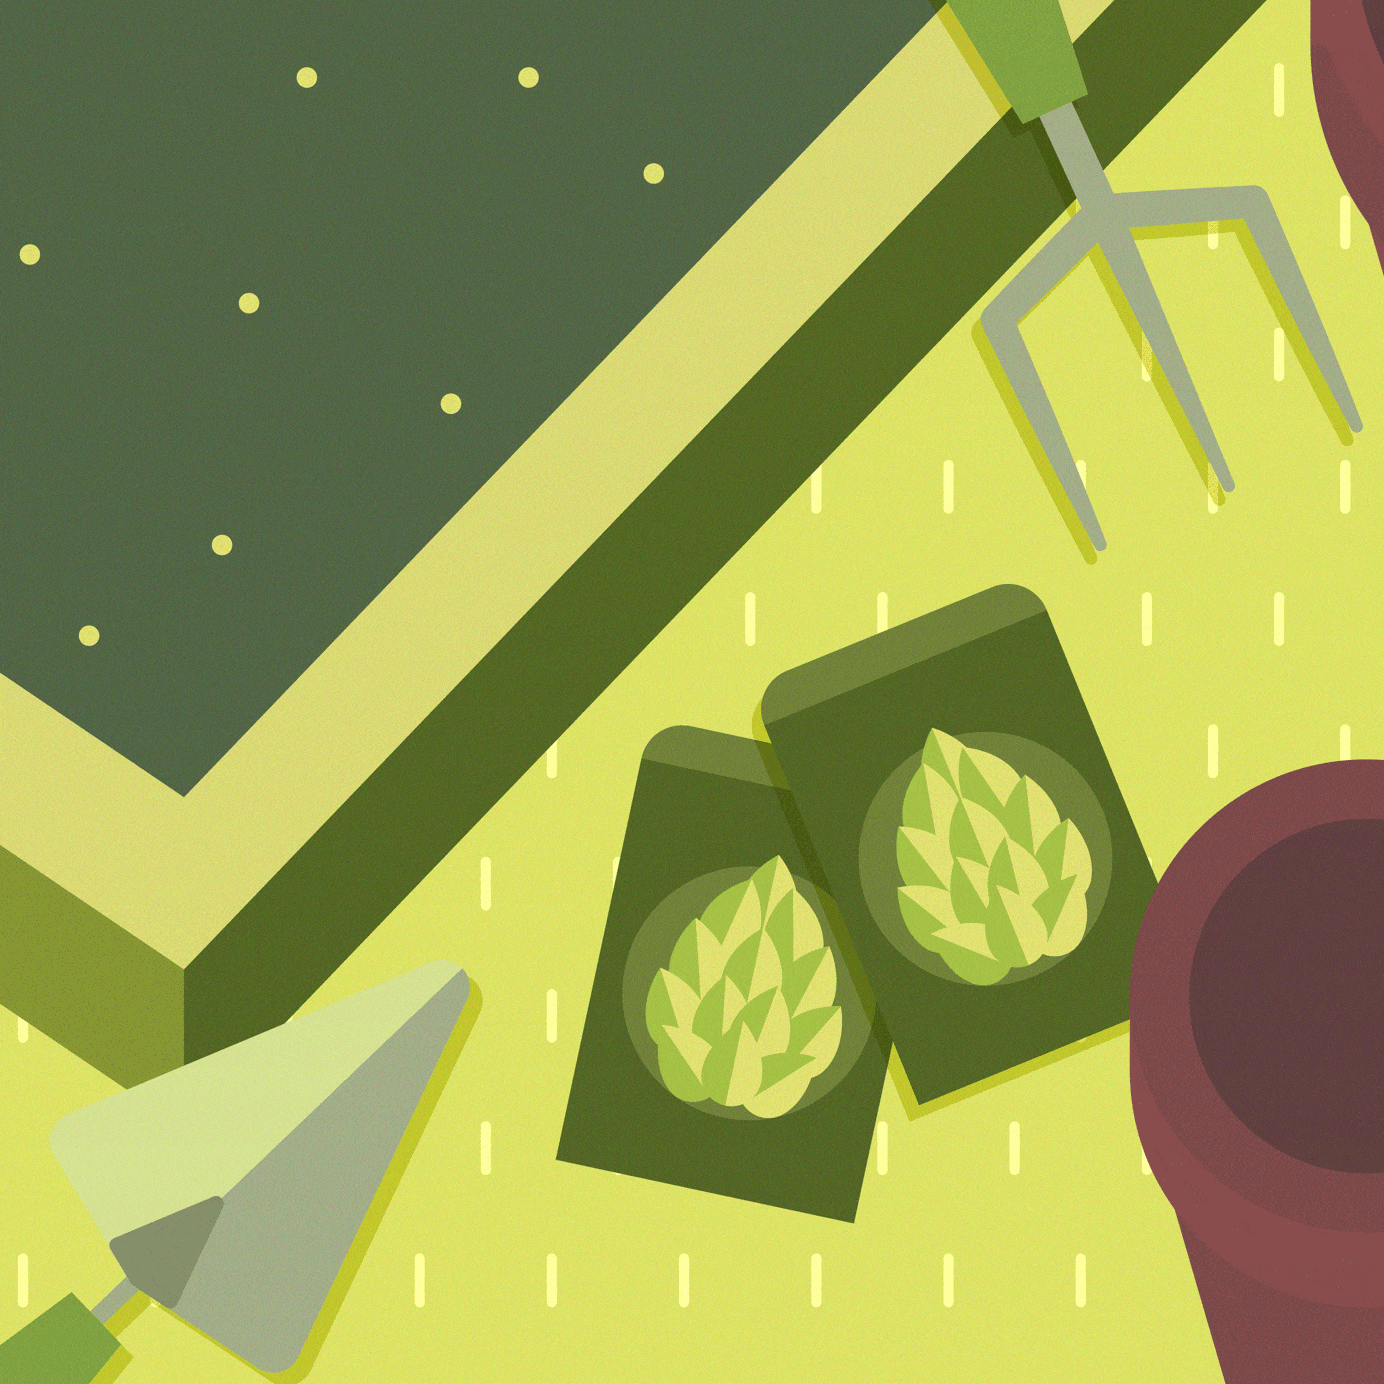 How to Grow Your Own Hops